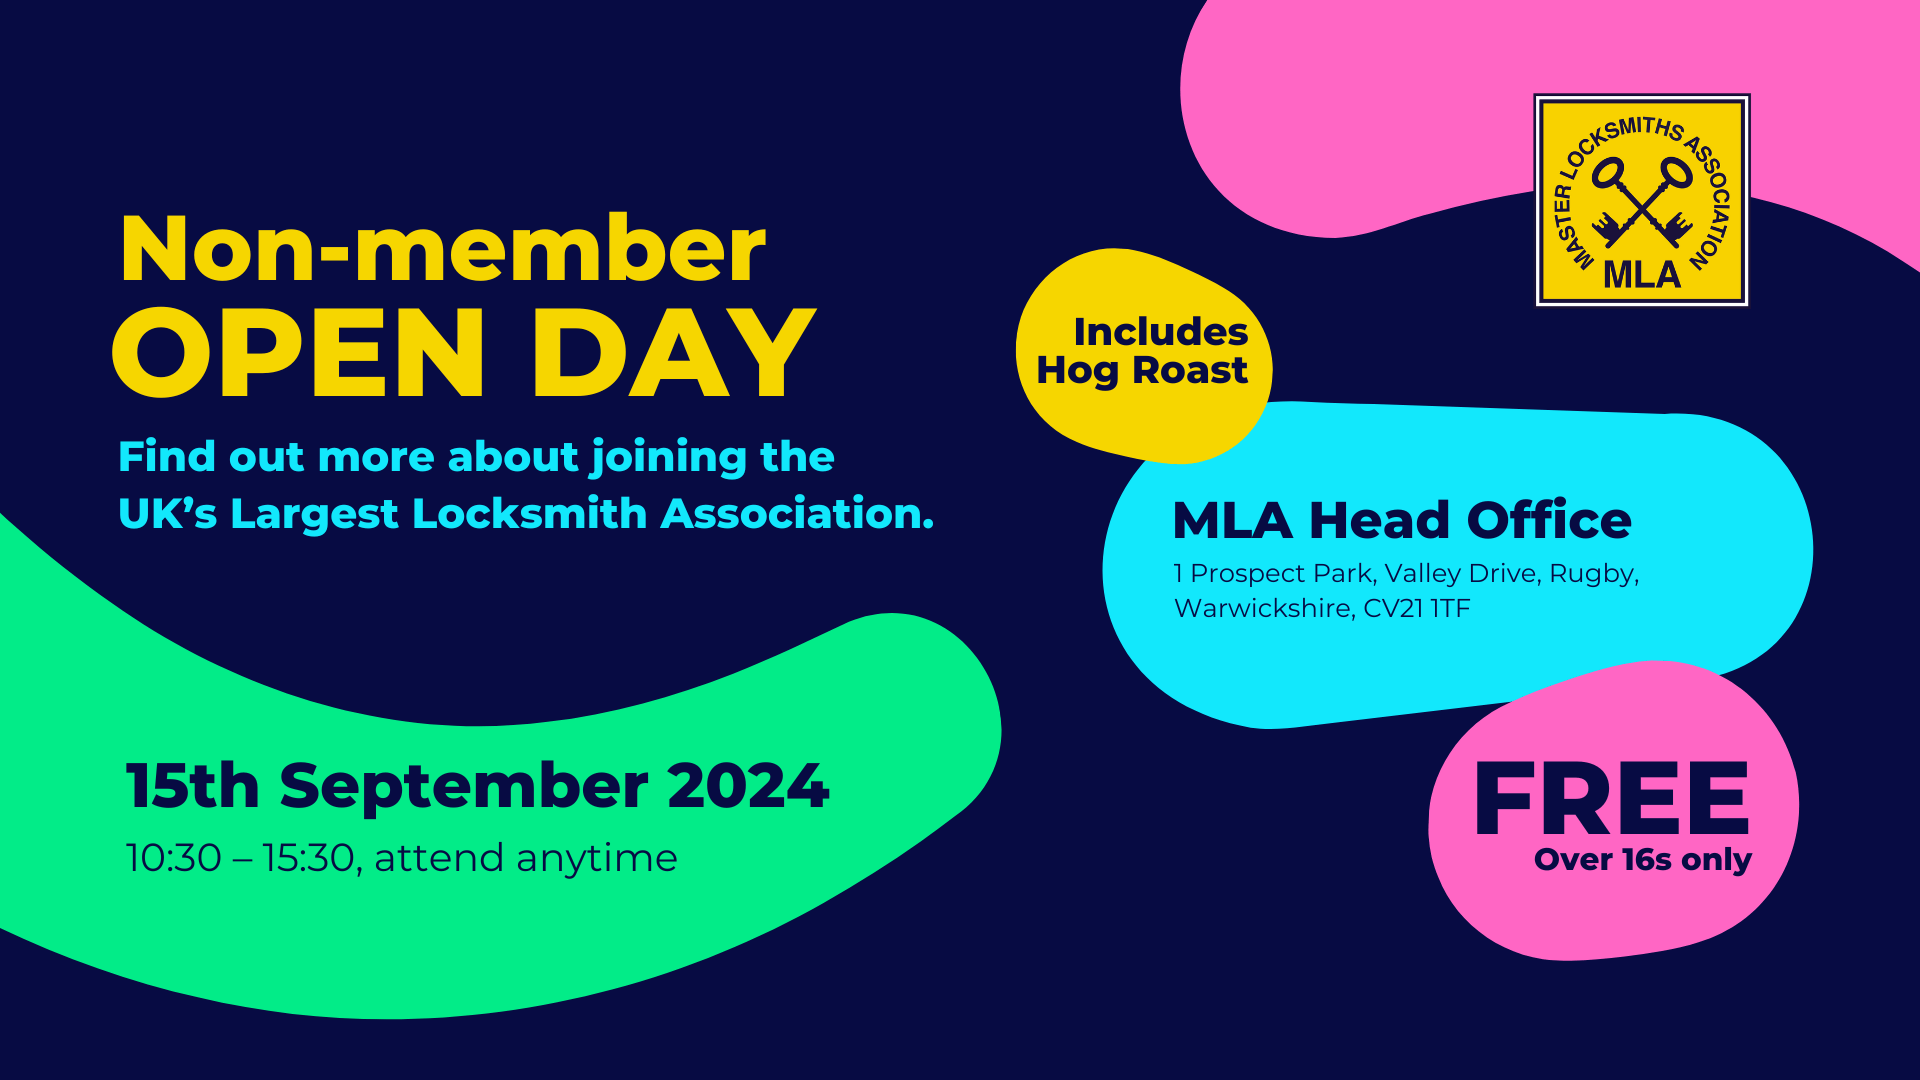 Introducing our First MLA Non-Member Open Day